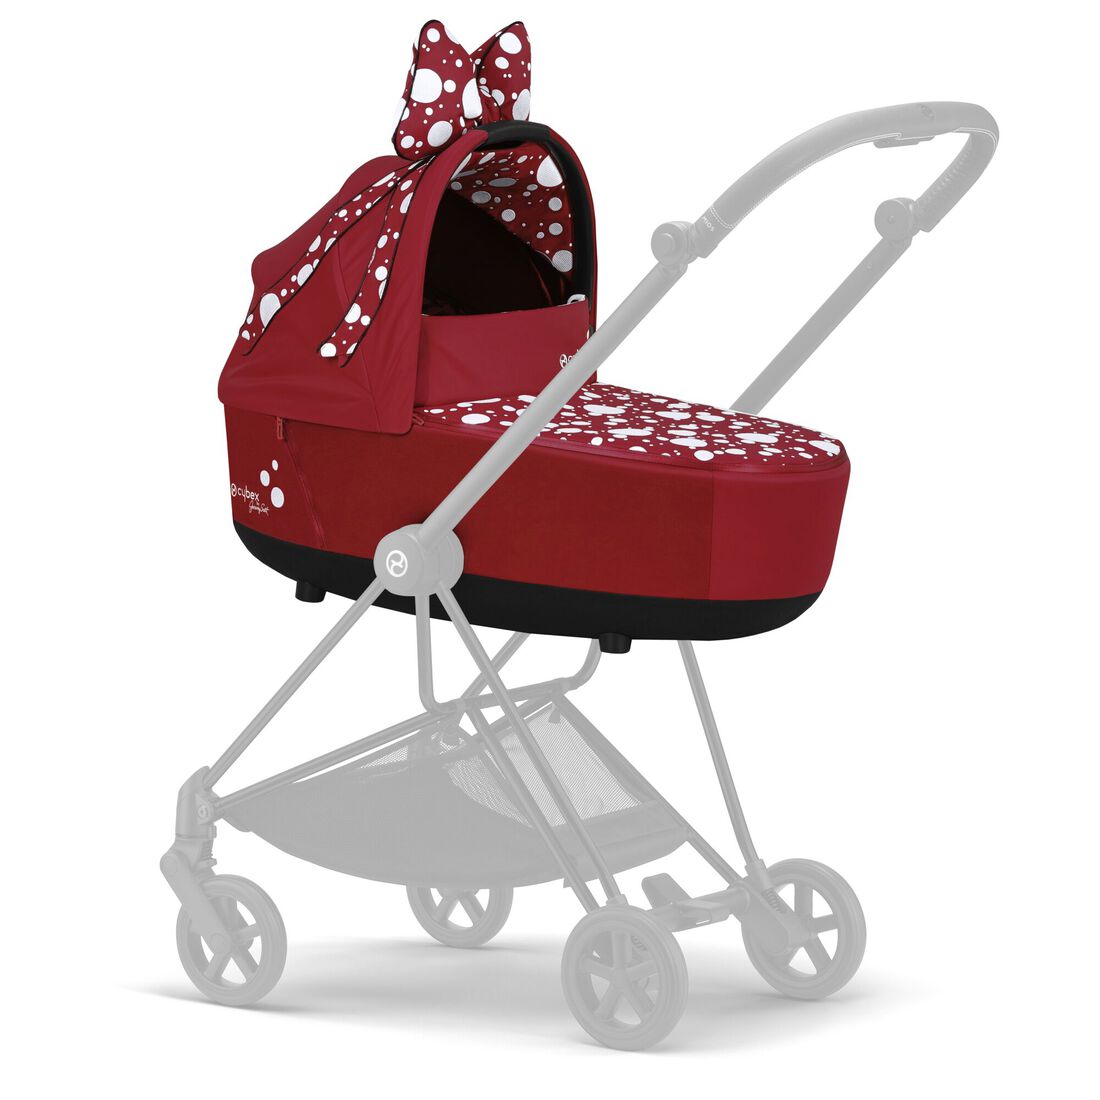 CYBEX Mios Lux Carry Cot - Petticoat Red in Petticoat Red large Bild 4